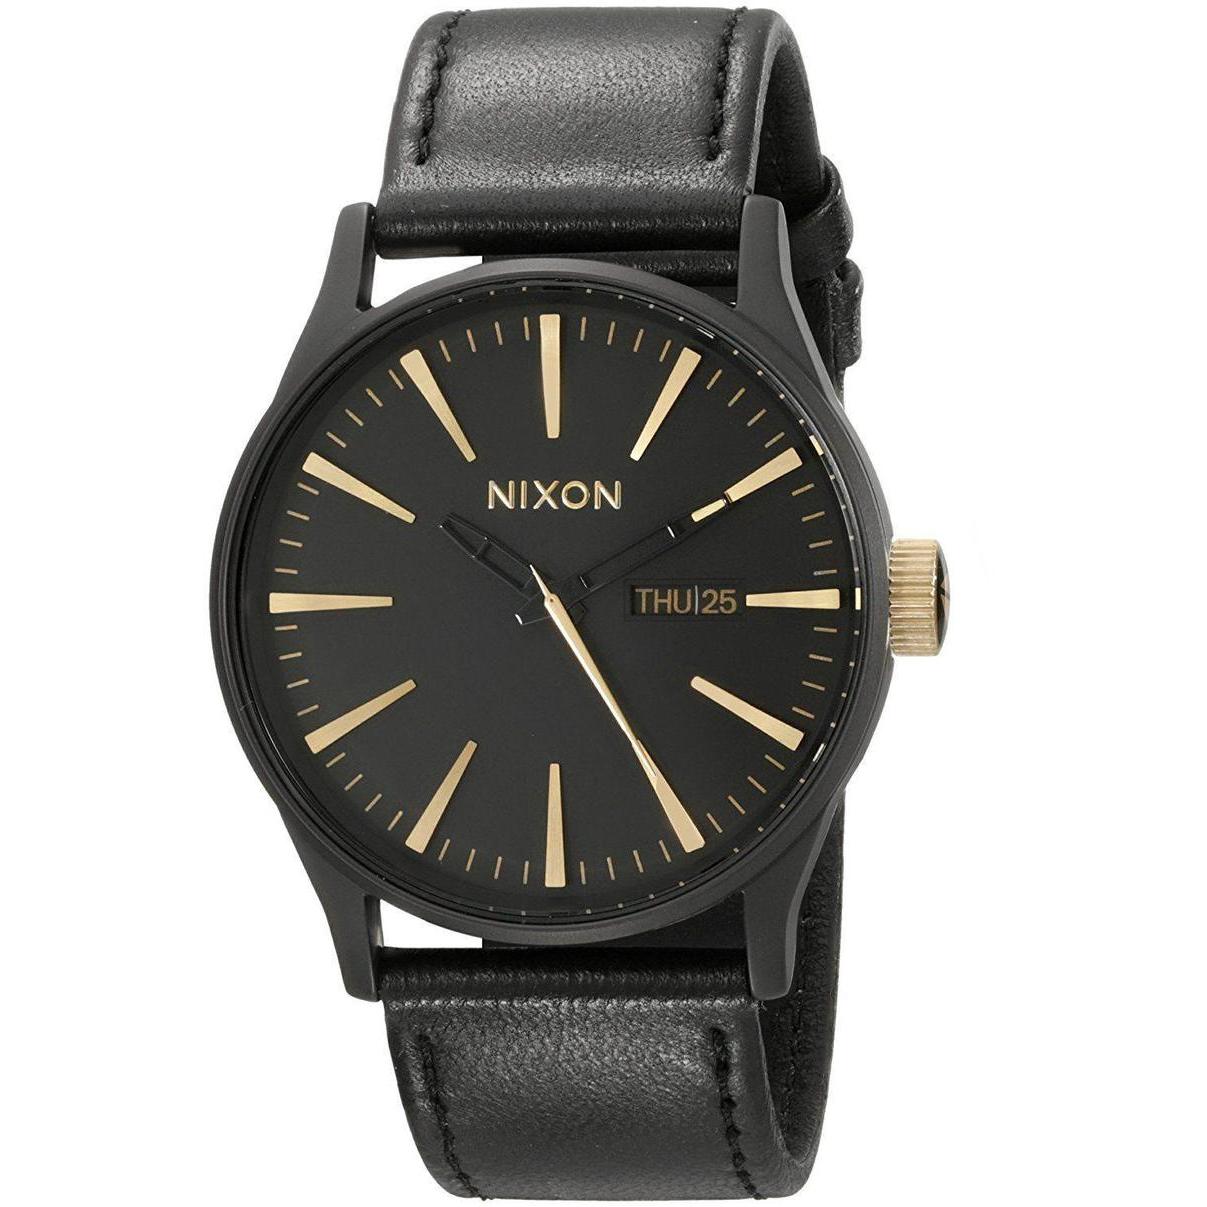 If you are looking Nixon Men's A105 Sentry 42mm Stainless Steel Leather Quartz Movement Watch you can buy to ritzcameras, It is on sale at the best price